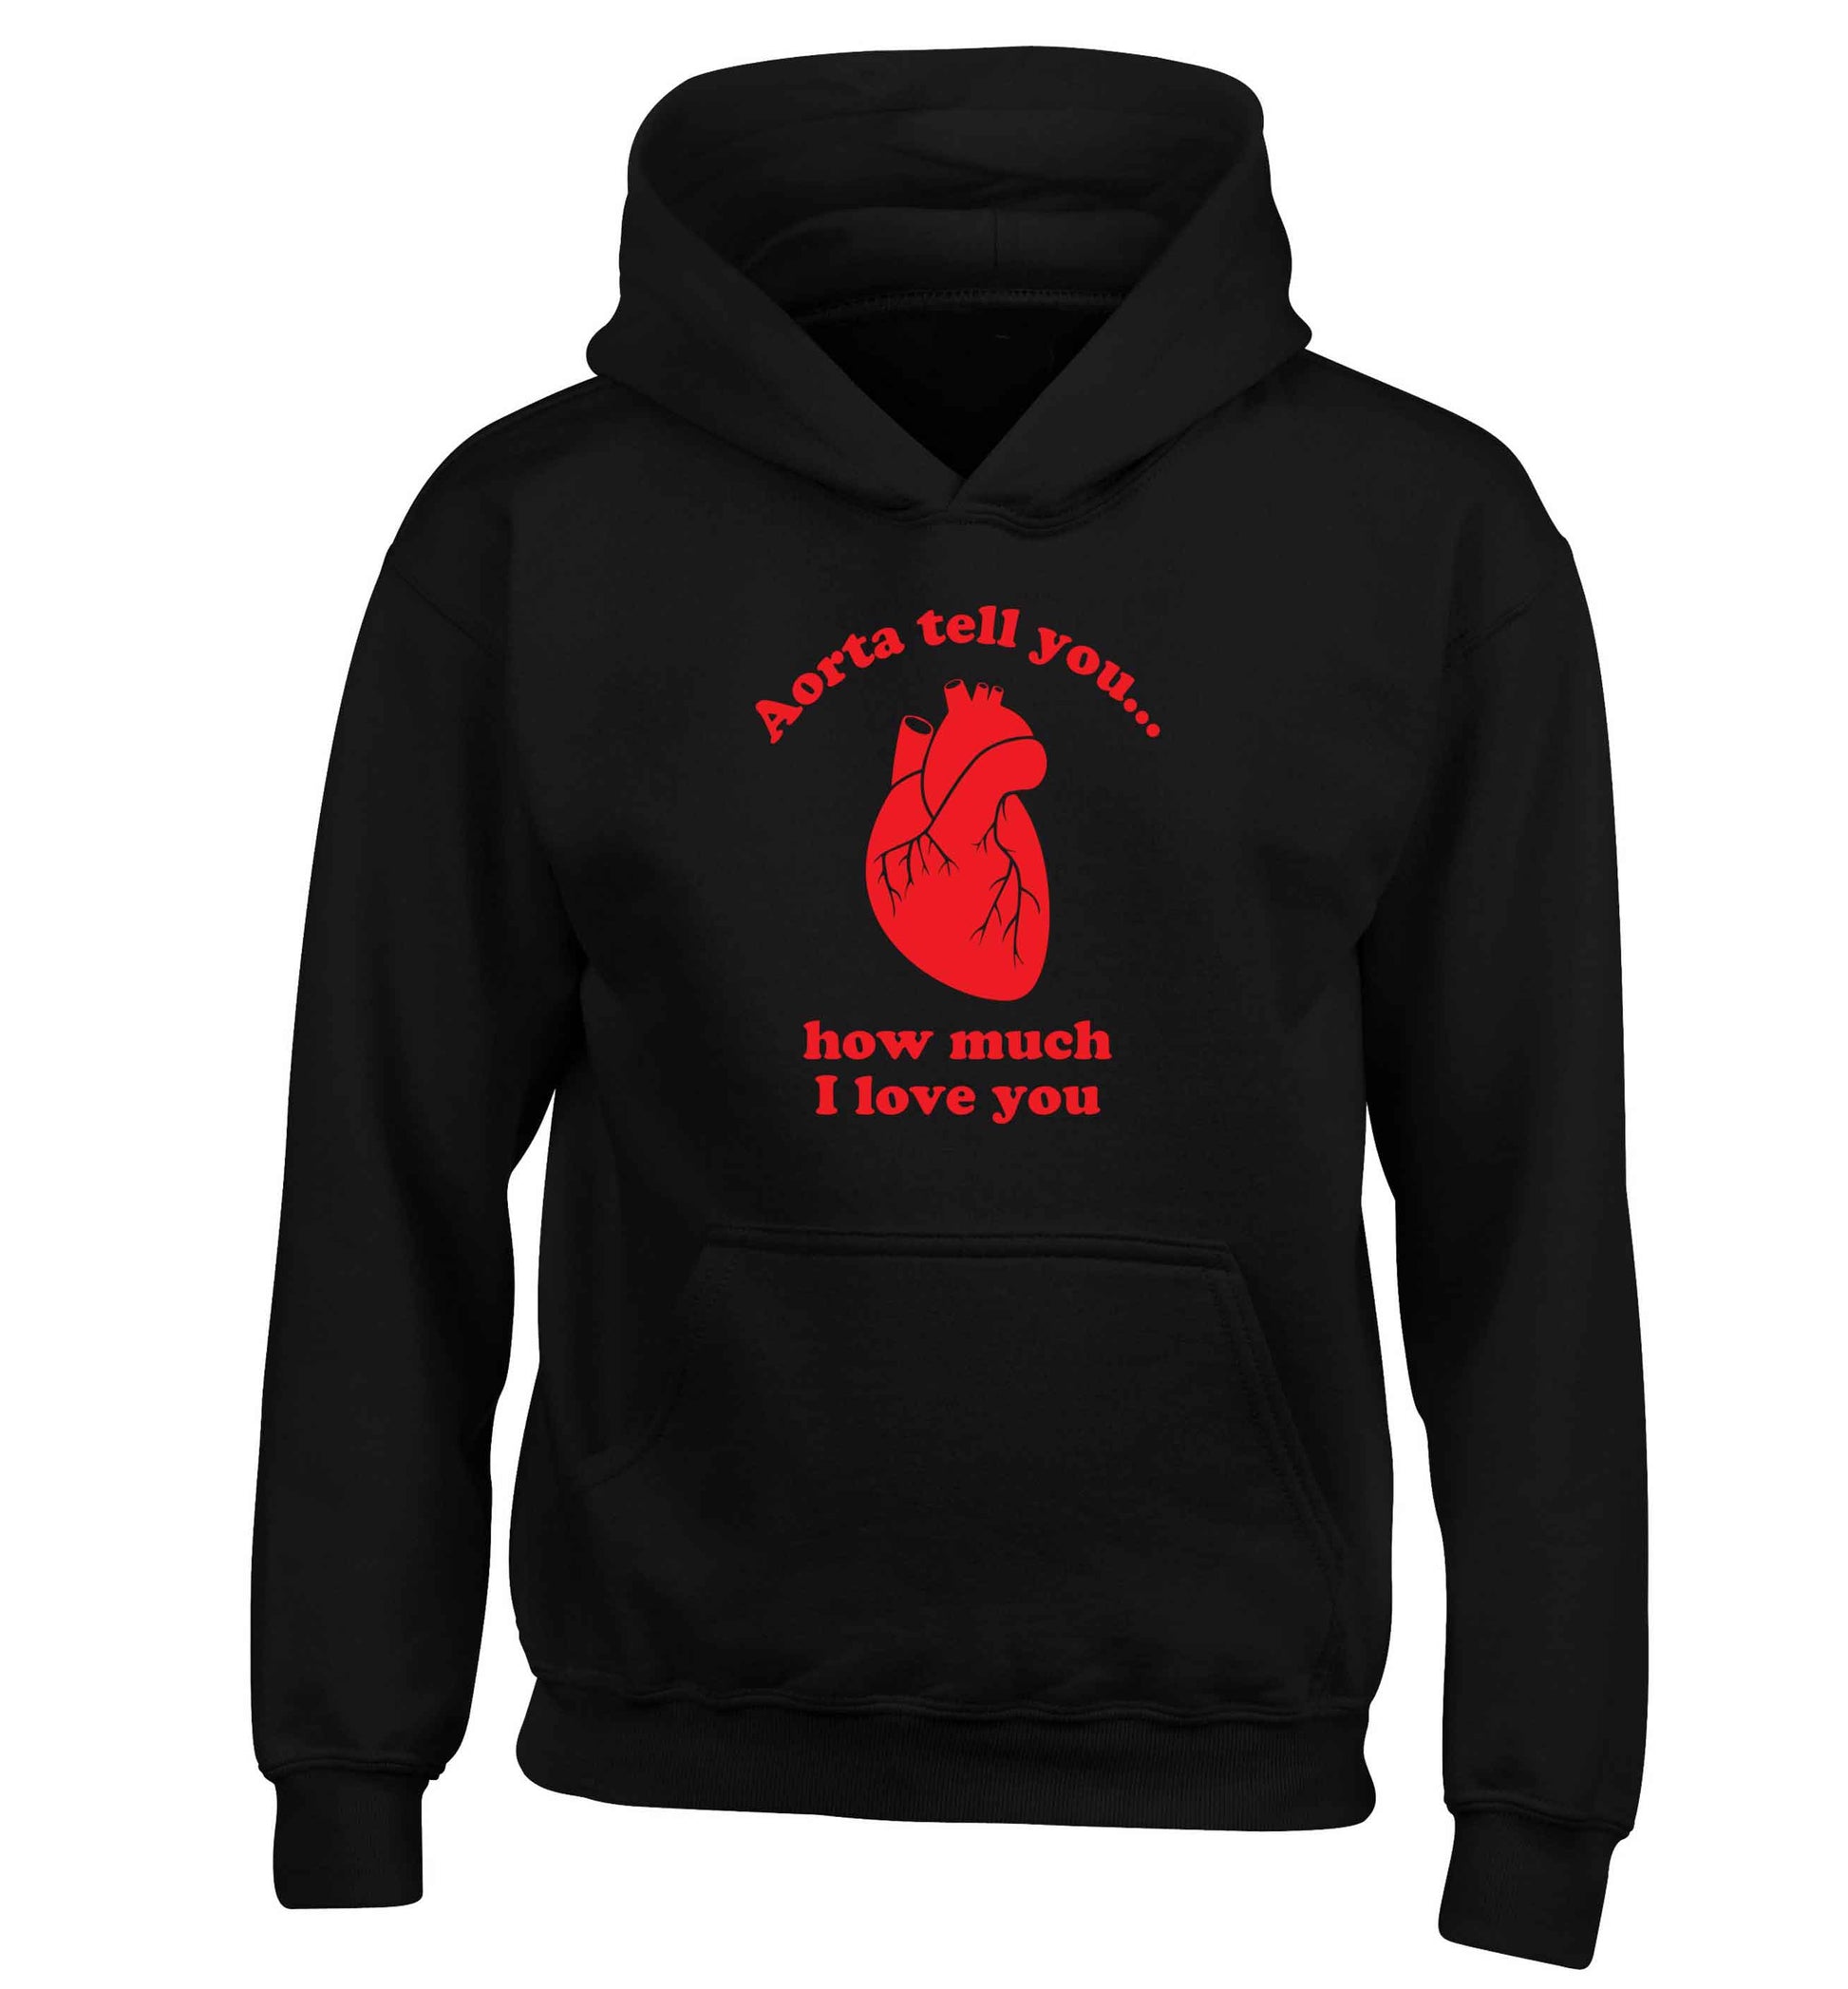 Aorta tell you how much I love you children's black hoodie 12-13 Years